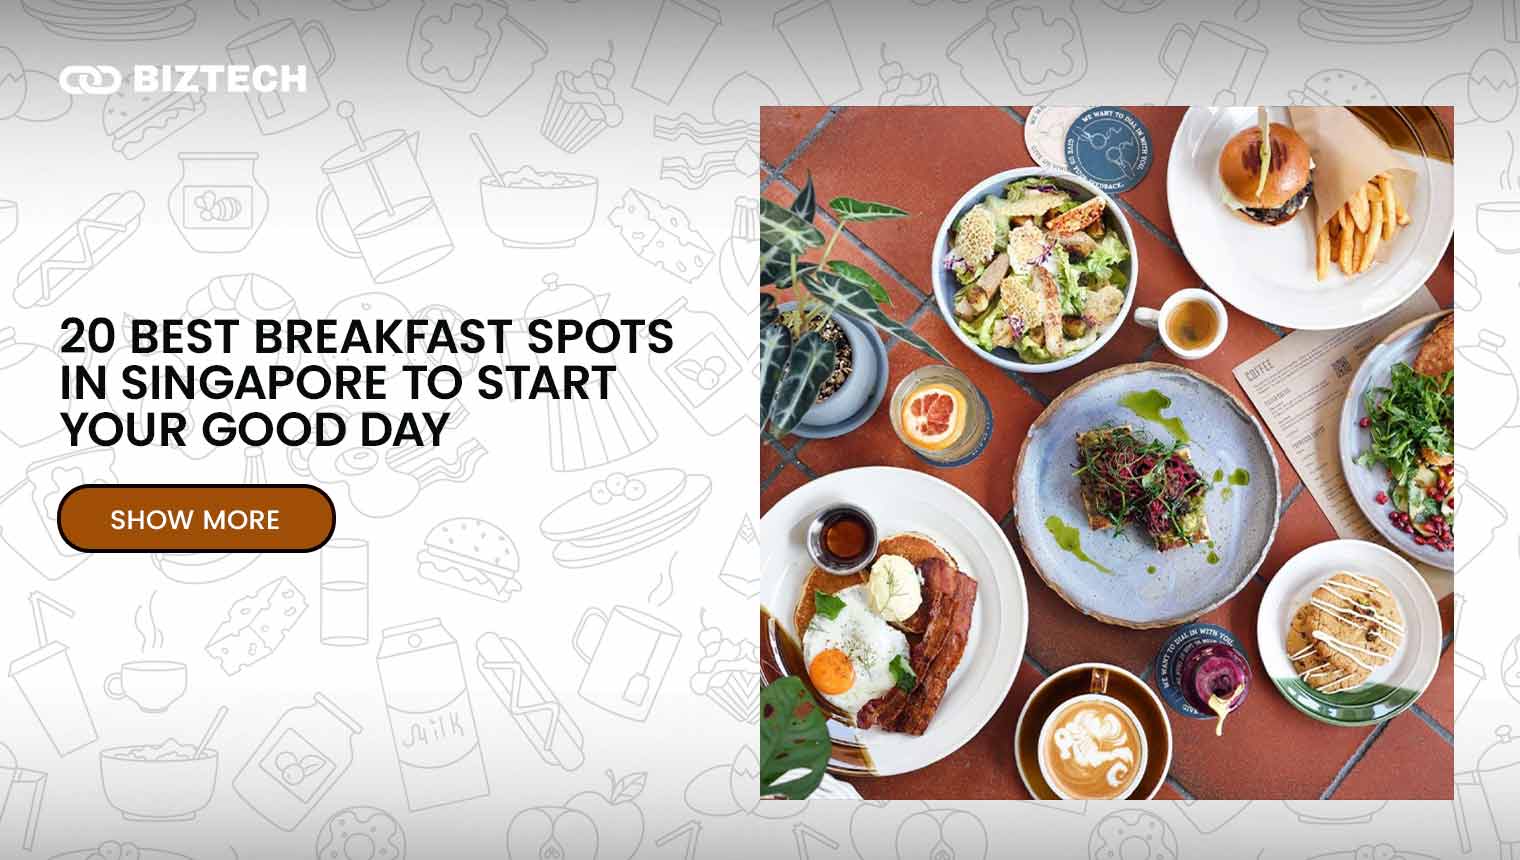 20 Best Breakfast Spots in Singapore To Start Your Good Day